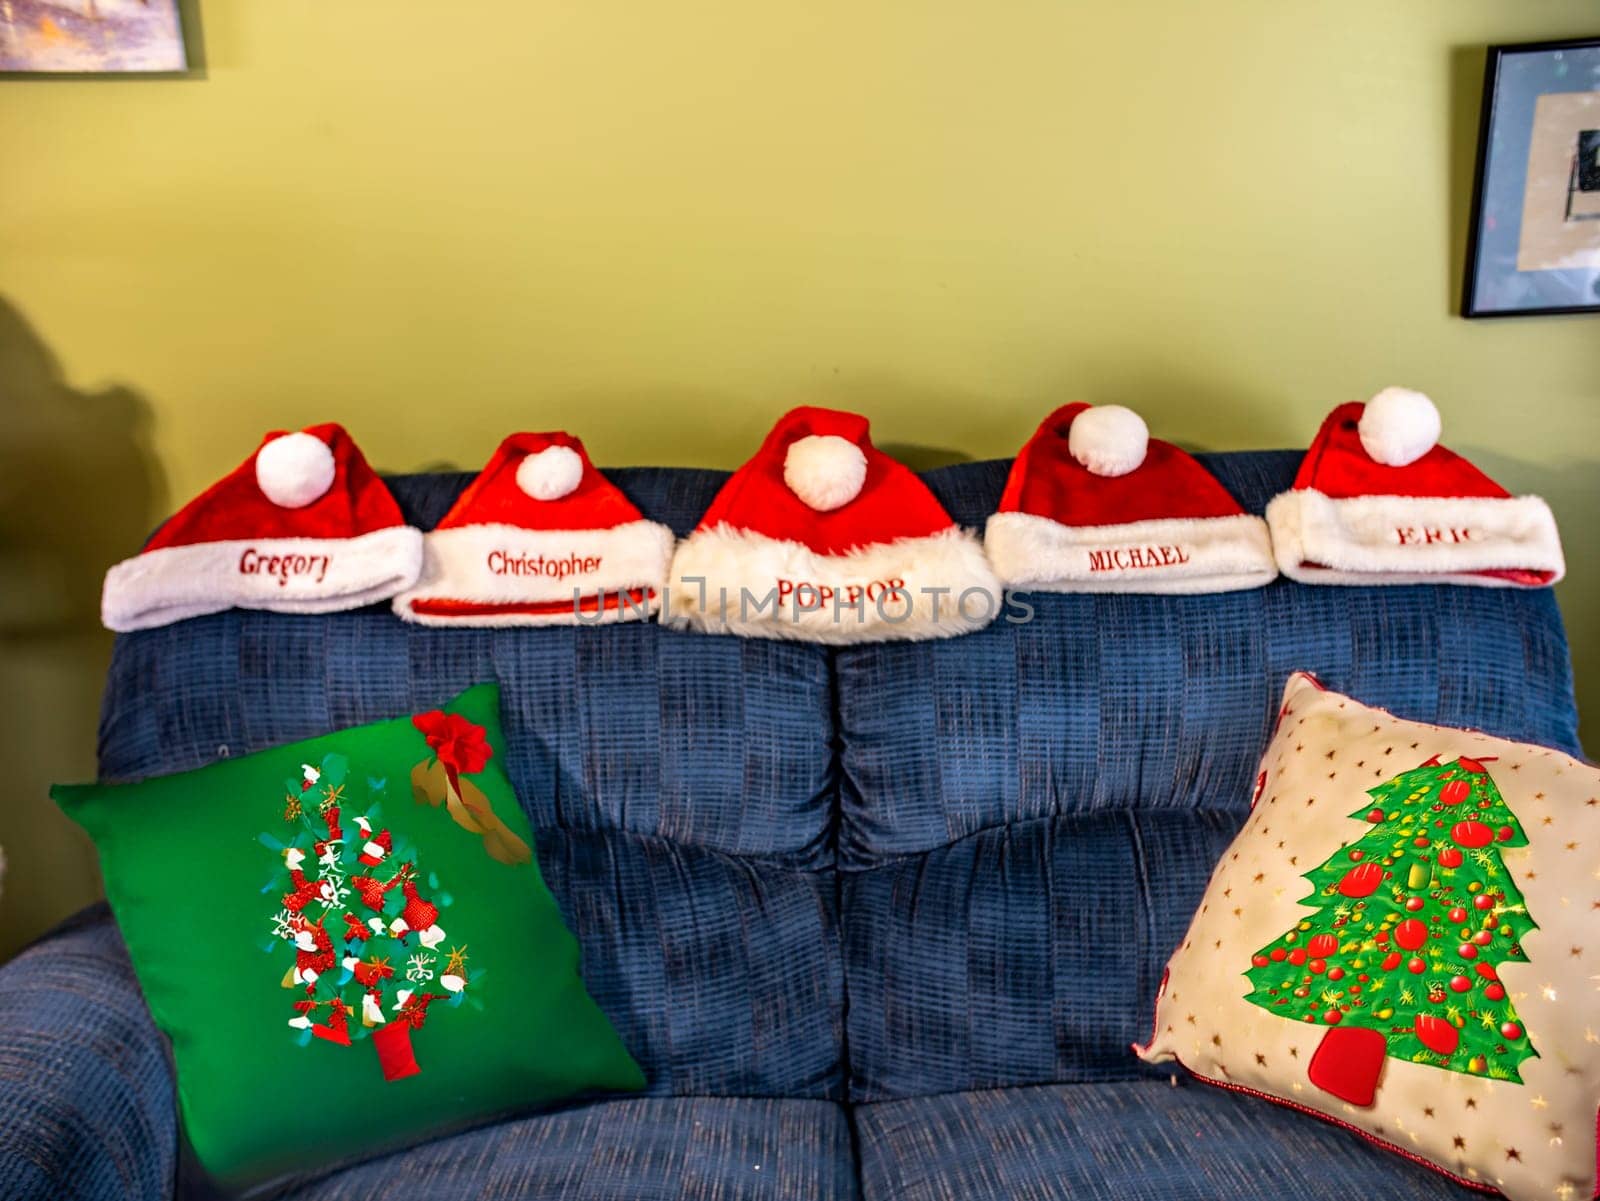 A group of five red santa hats are sitting on a blue couch. The hats are personalized with names and are arranged in a row. The couch is decorated with pillows